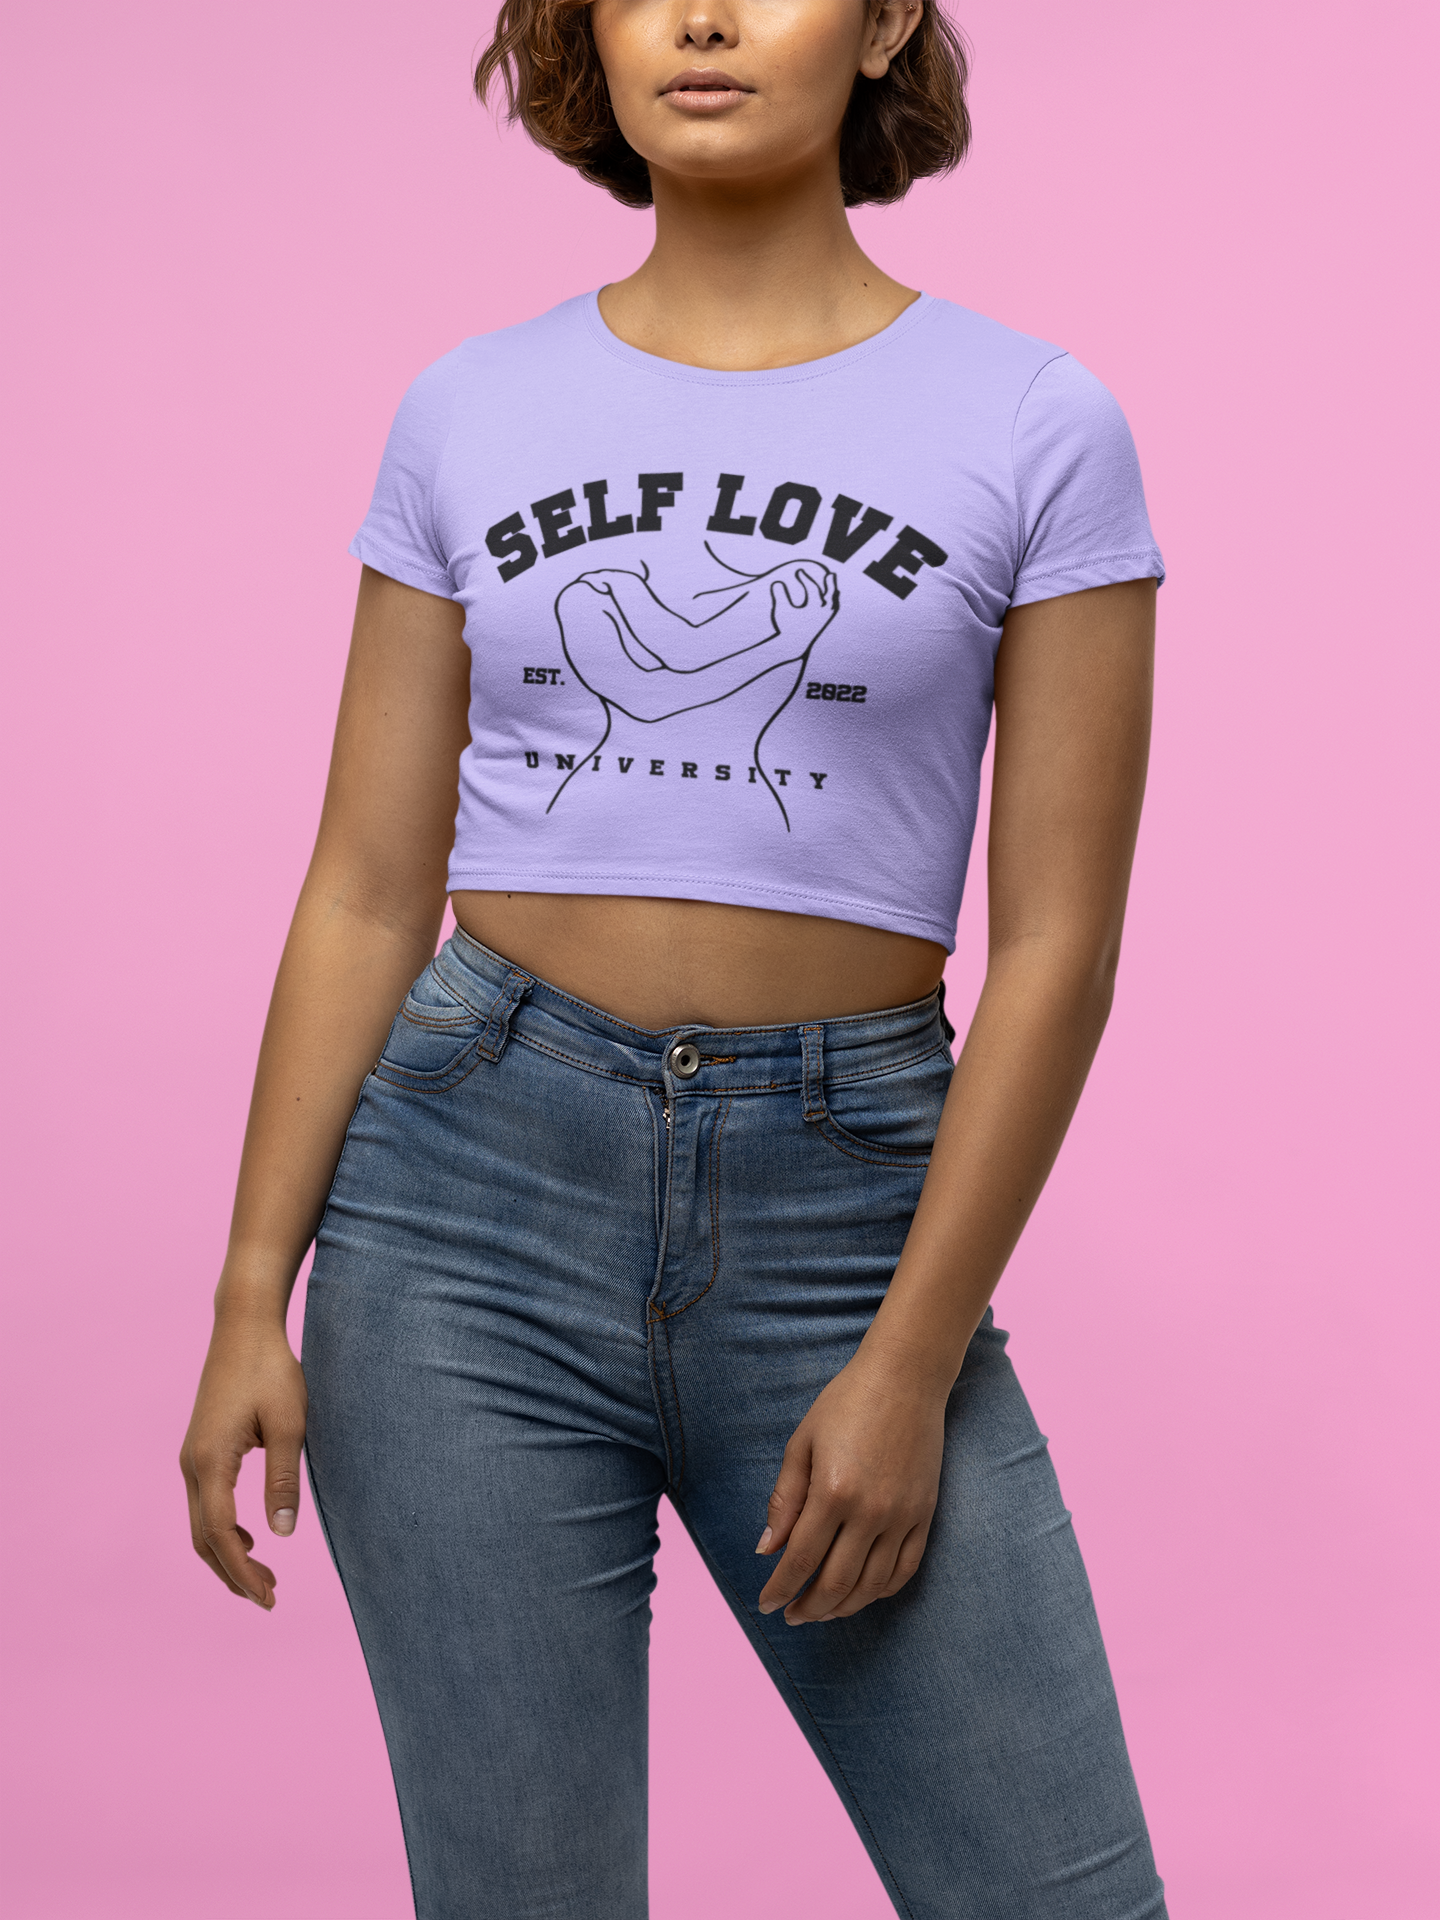 THE FITTED CROP – THE "I LOVE MYSELF"